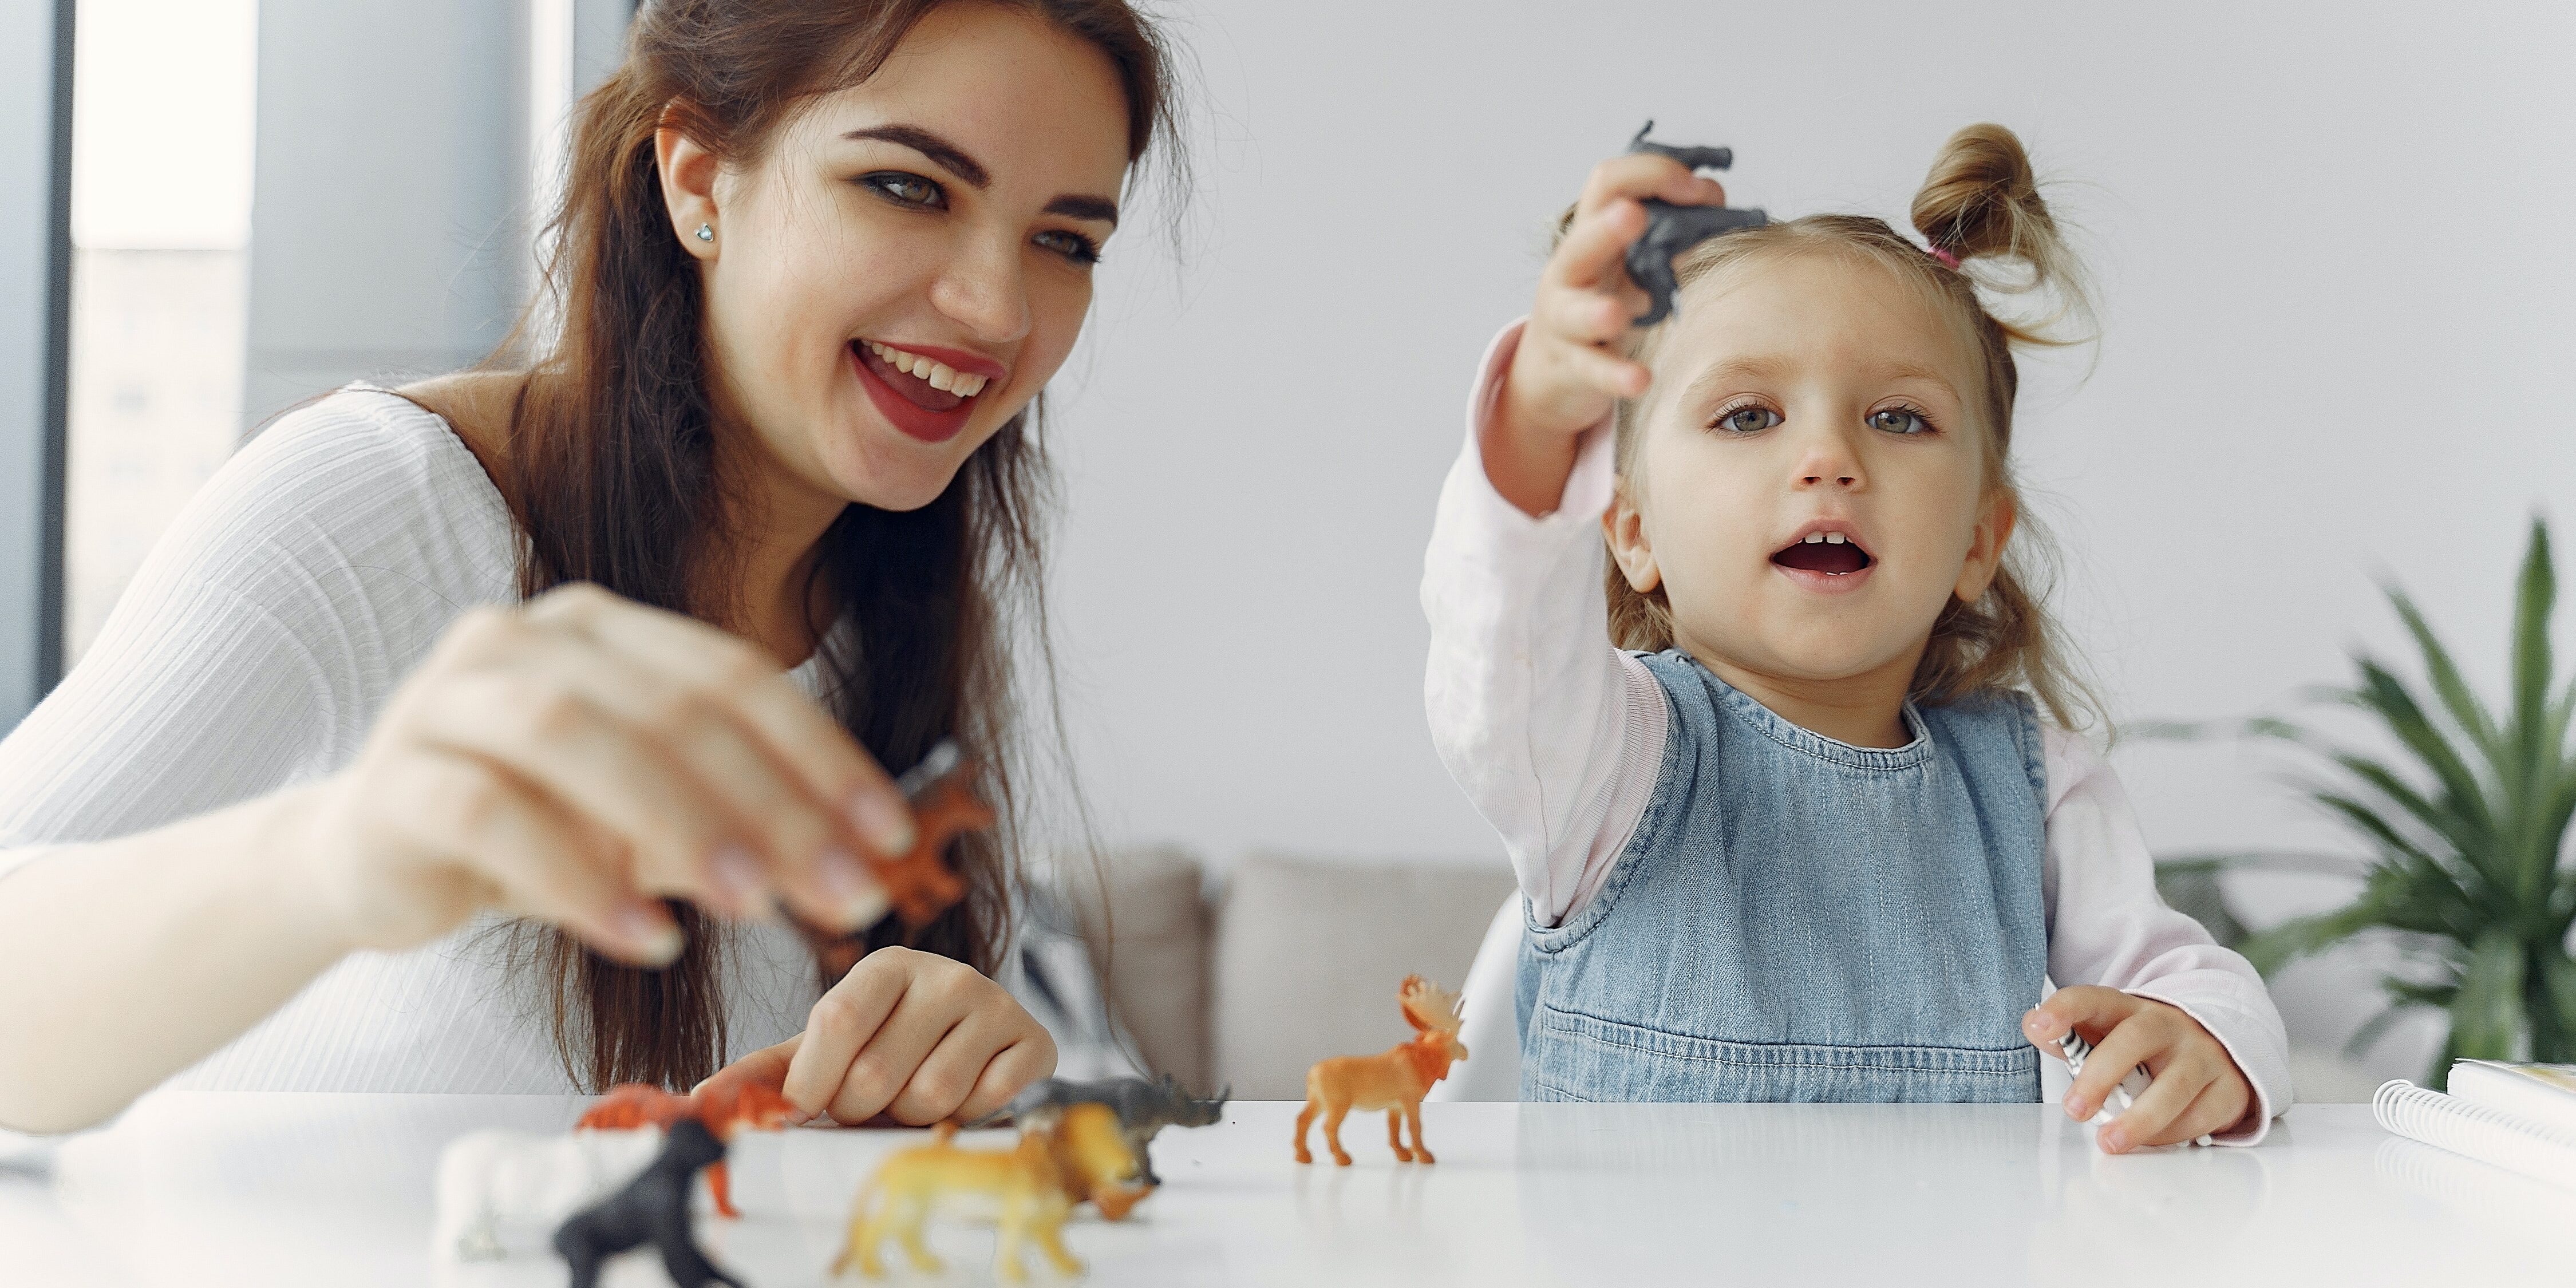 little-girl-playing-animal-figures-with-her-mother-3985019